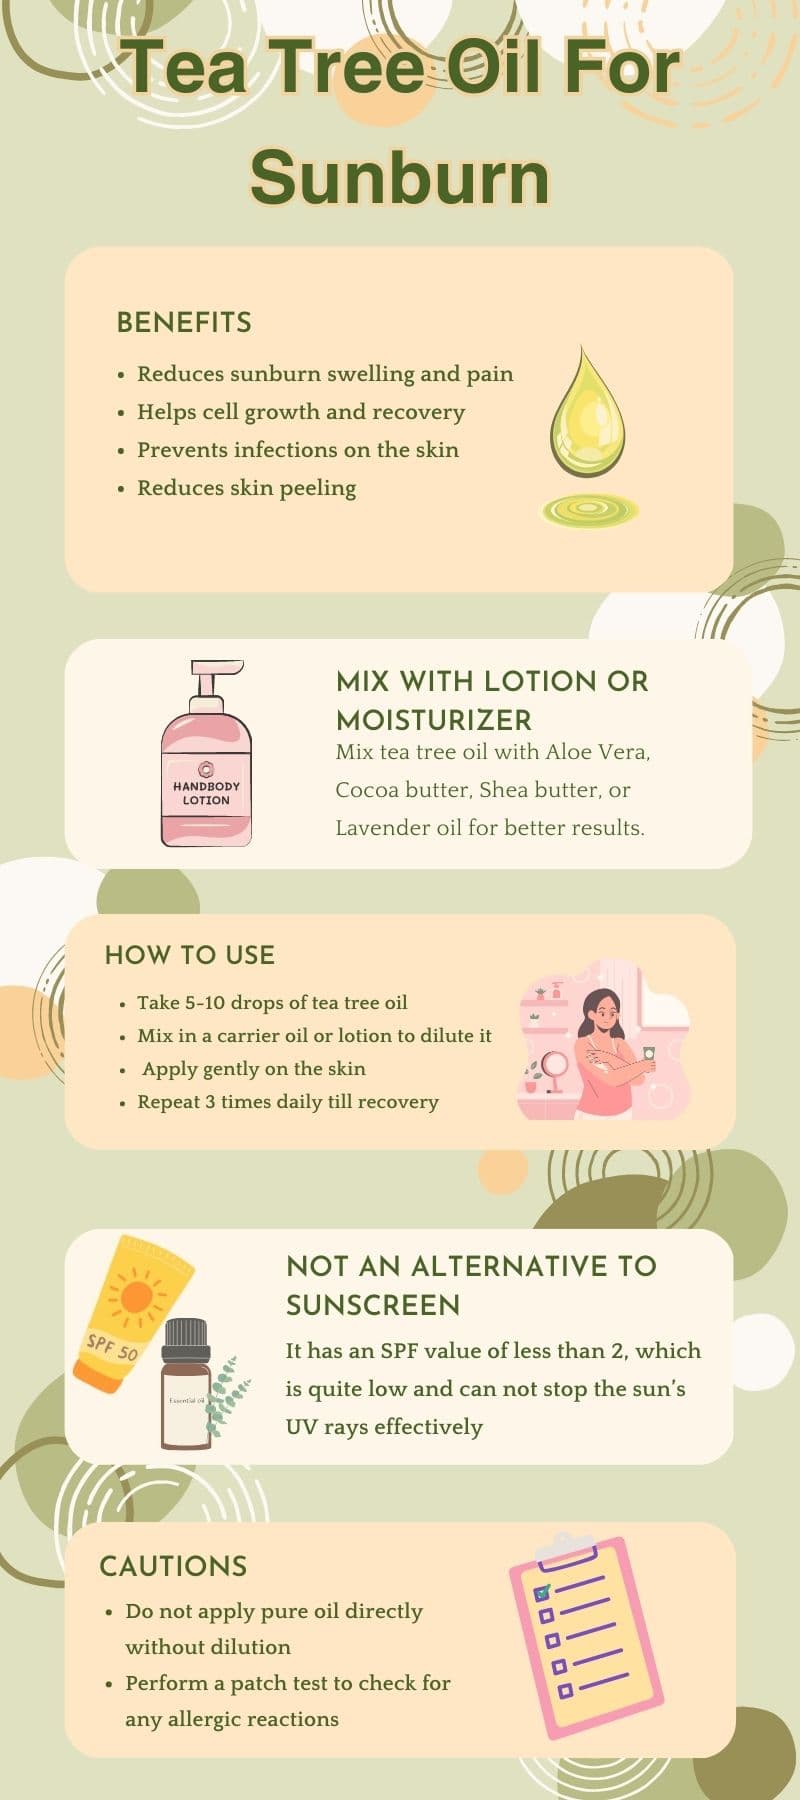 Infographic-Tips to use tea tree oil and cautions